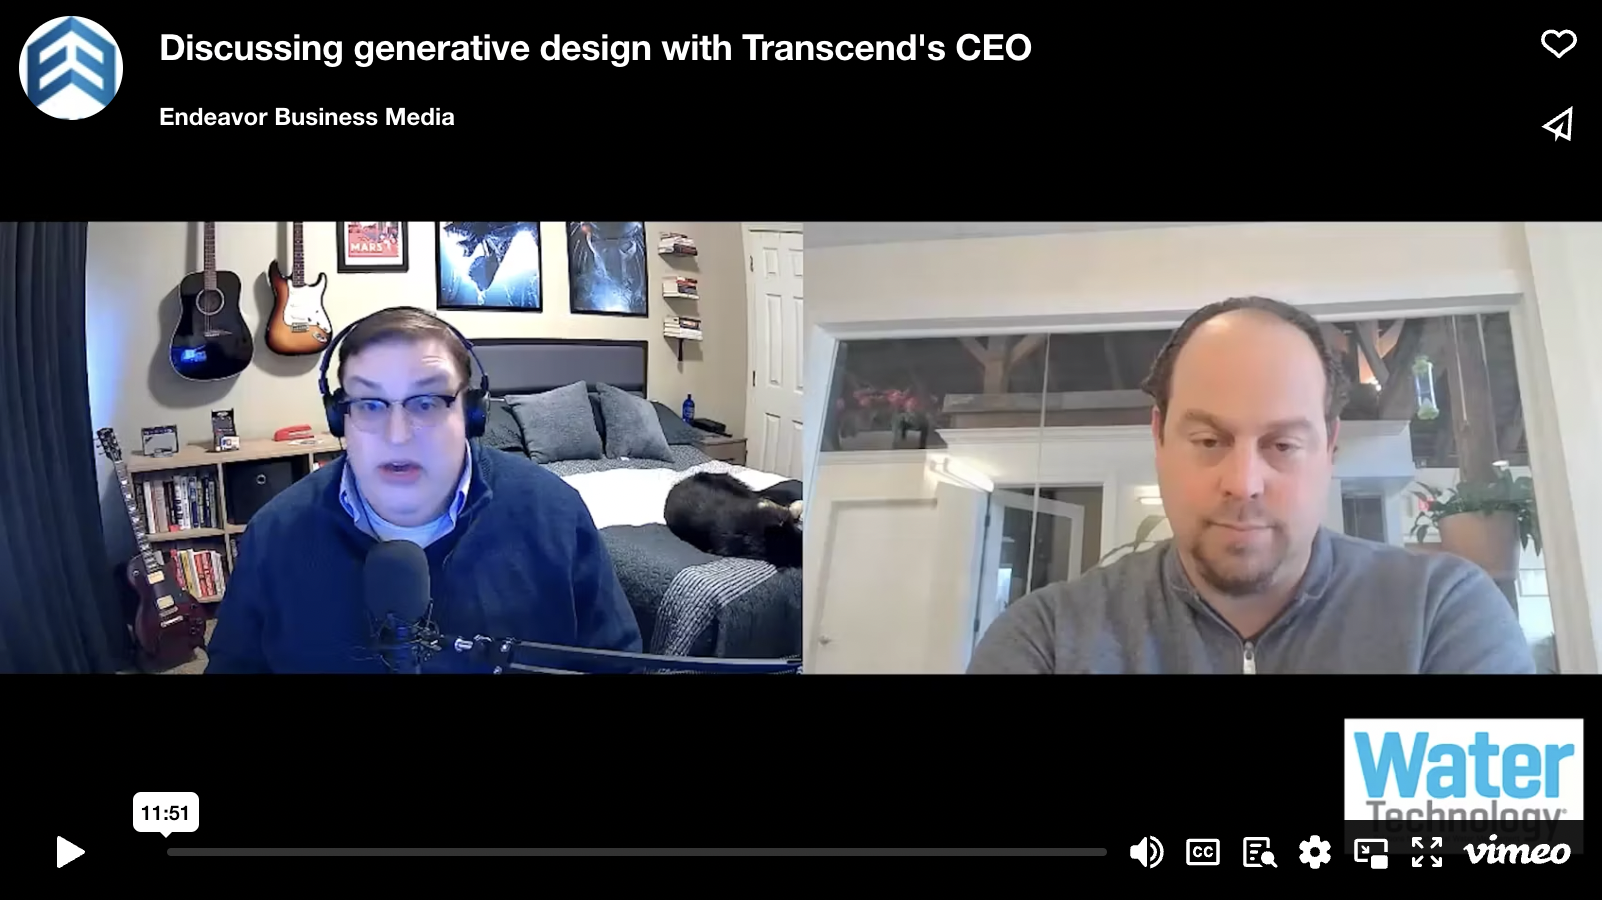 Discussing generative design with Transcend's CEO